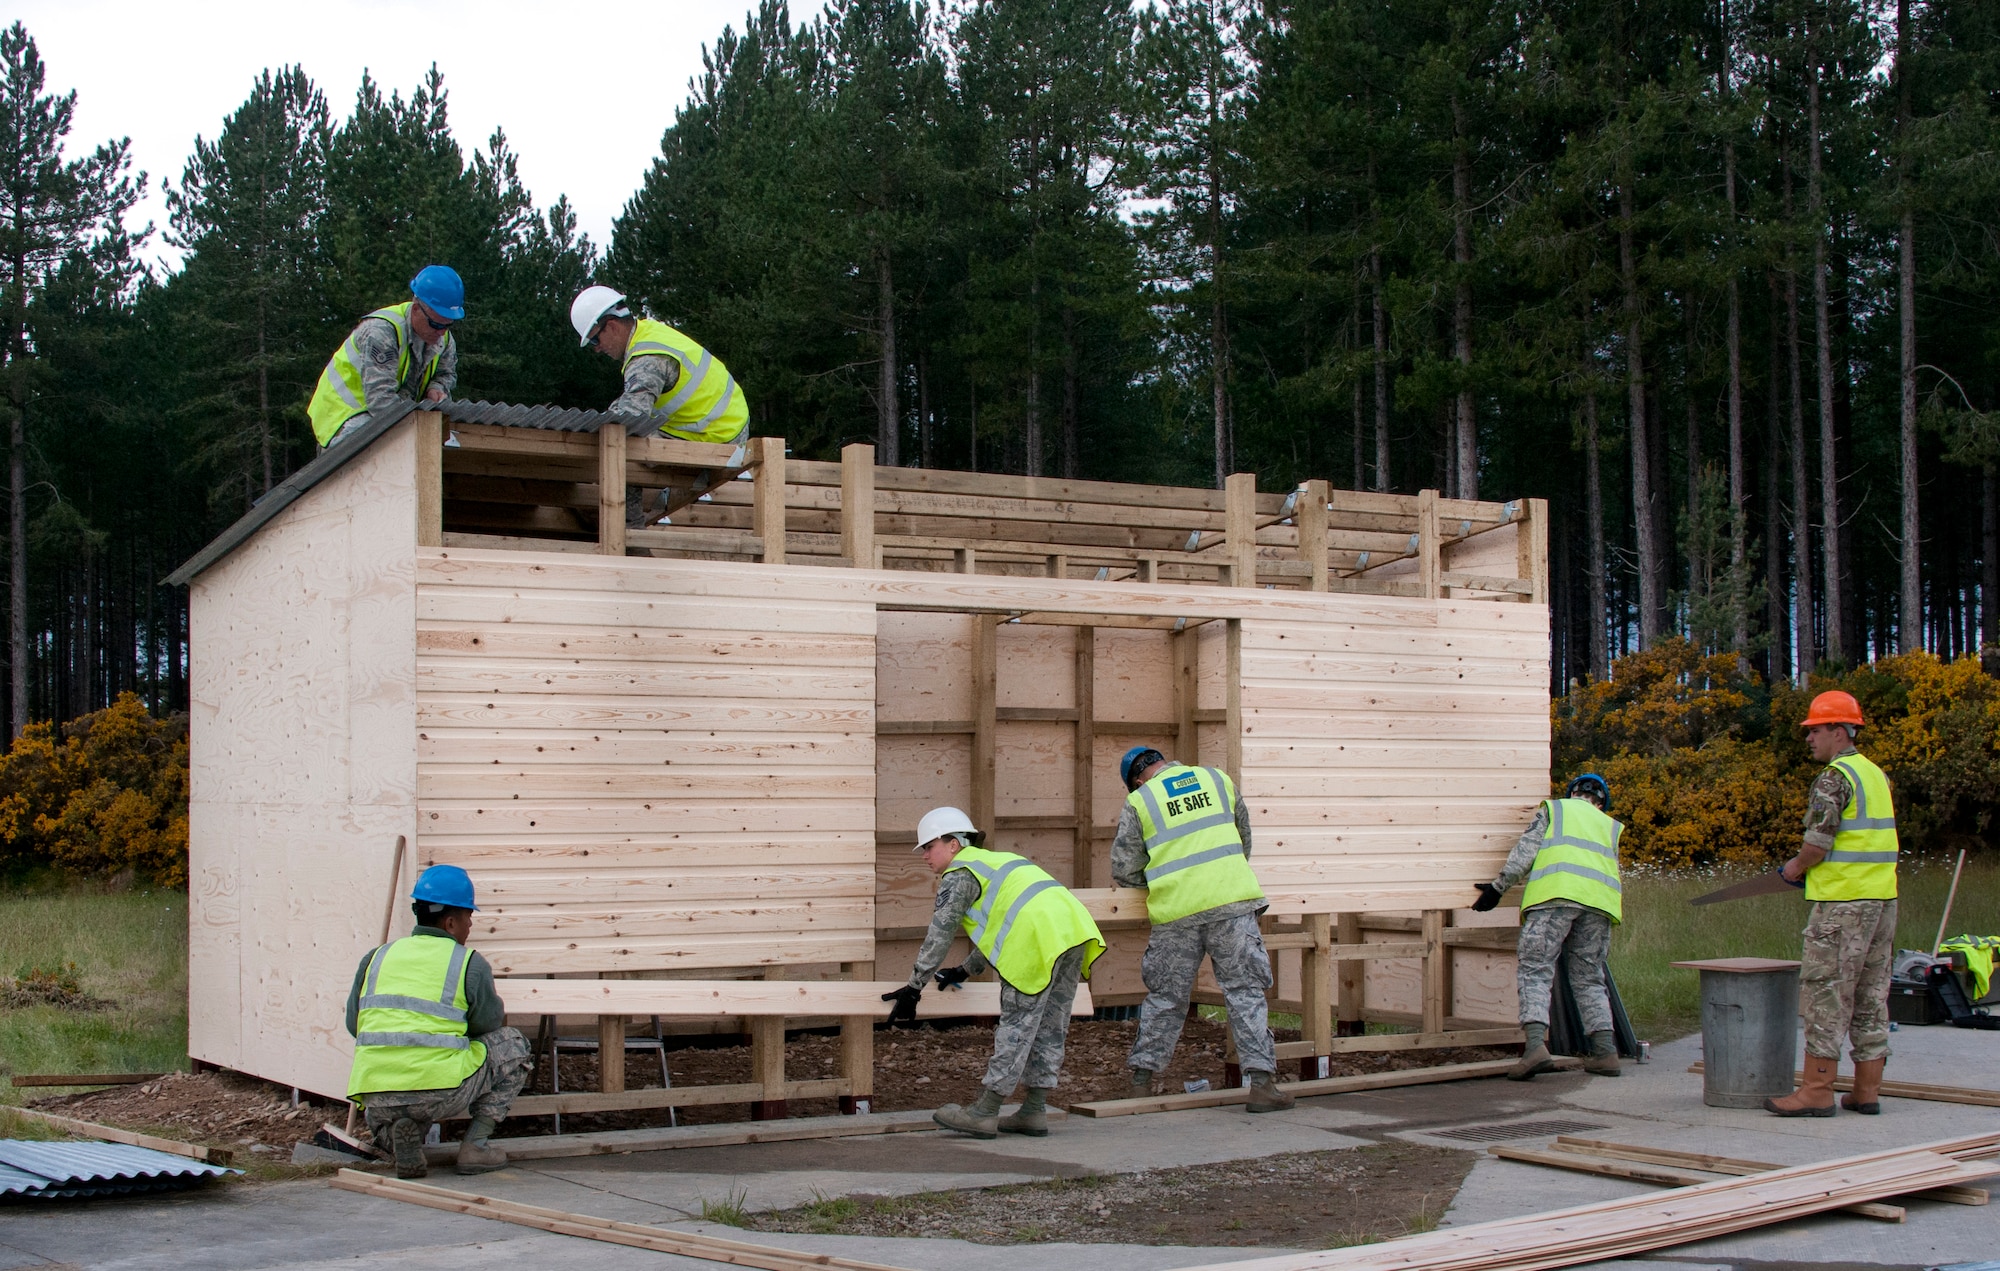 U.S. Air Force Airmen of the 128th Air Refueling Wing, Wisconsin, Civil Engineering Squadron work to complete a troop shelter June 17, 2015, at Kinloss Barracks in Morayshire, Scotland, United Kingdom. The troop shelter is set to be used by the British Army for Kinloss Barracks’ air support training. The building of a troop shelter was a task assigned to the airmen in support of Exercise Flying Rose. The 128th Air Refueling Wing Civil Engineering Squadron Airmen were participating in Exercise Flying Rose, an exchange exercise between the U.S. Air National Guard and British Army where forces deploy to one another’s countries and work to complete construction-related tasks. (U.S. Air National Guard photo by Airman 1st Class Morgan R. Lipinski/Released)